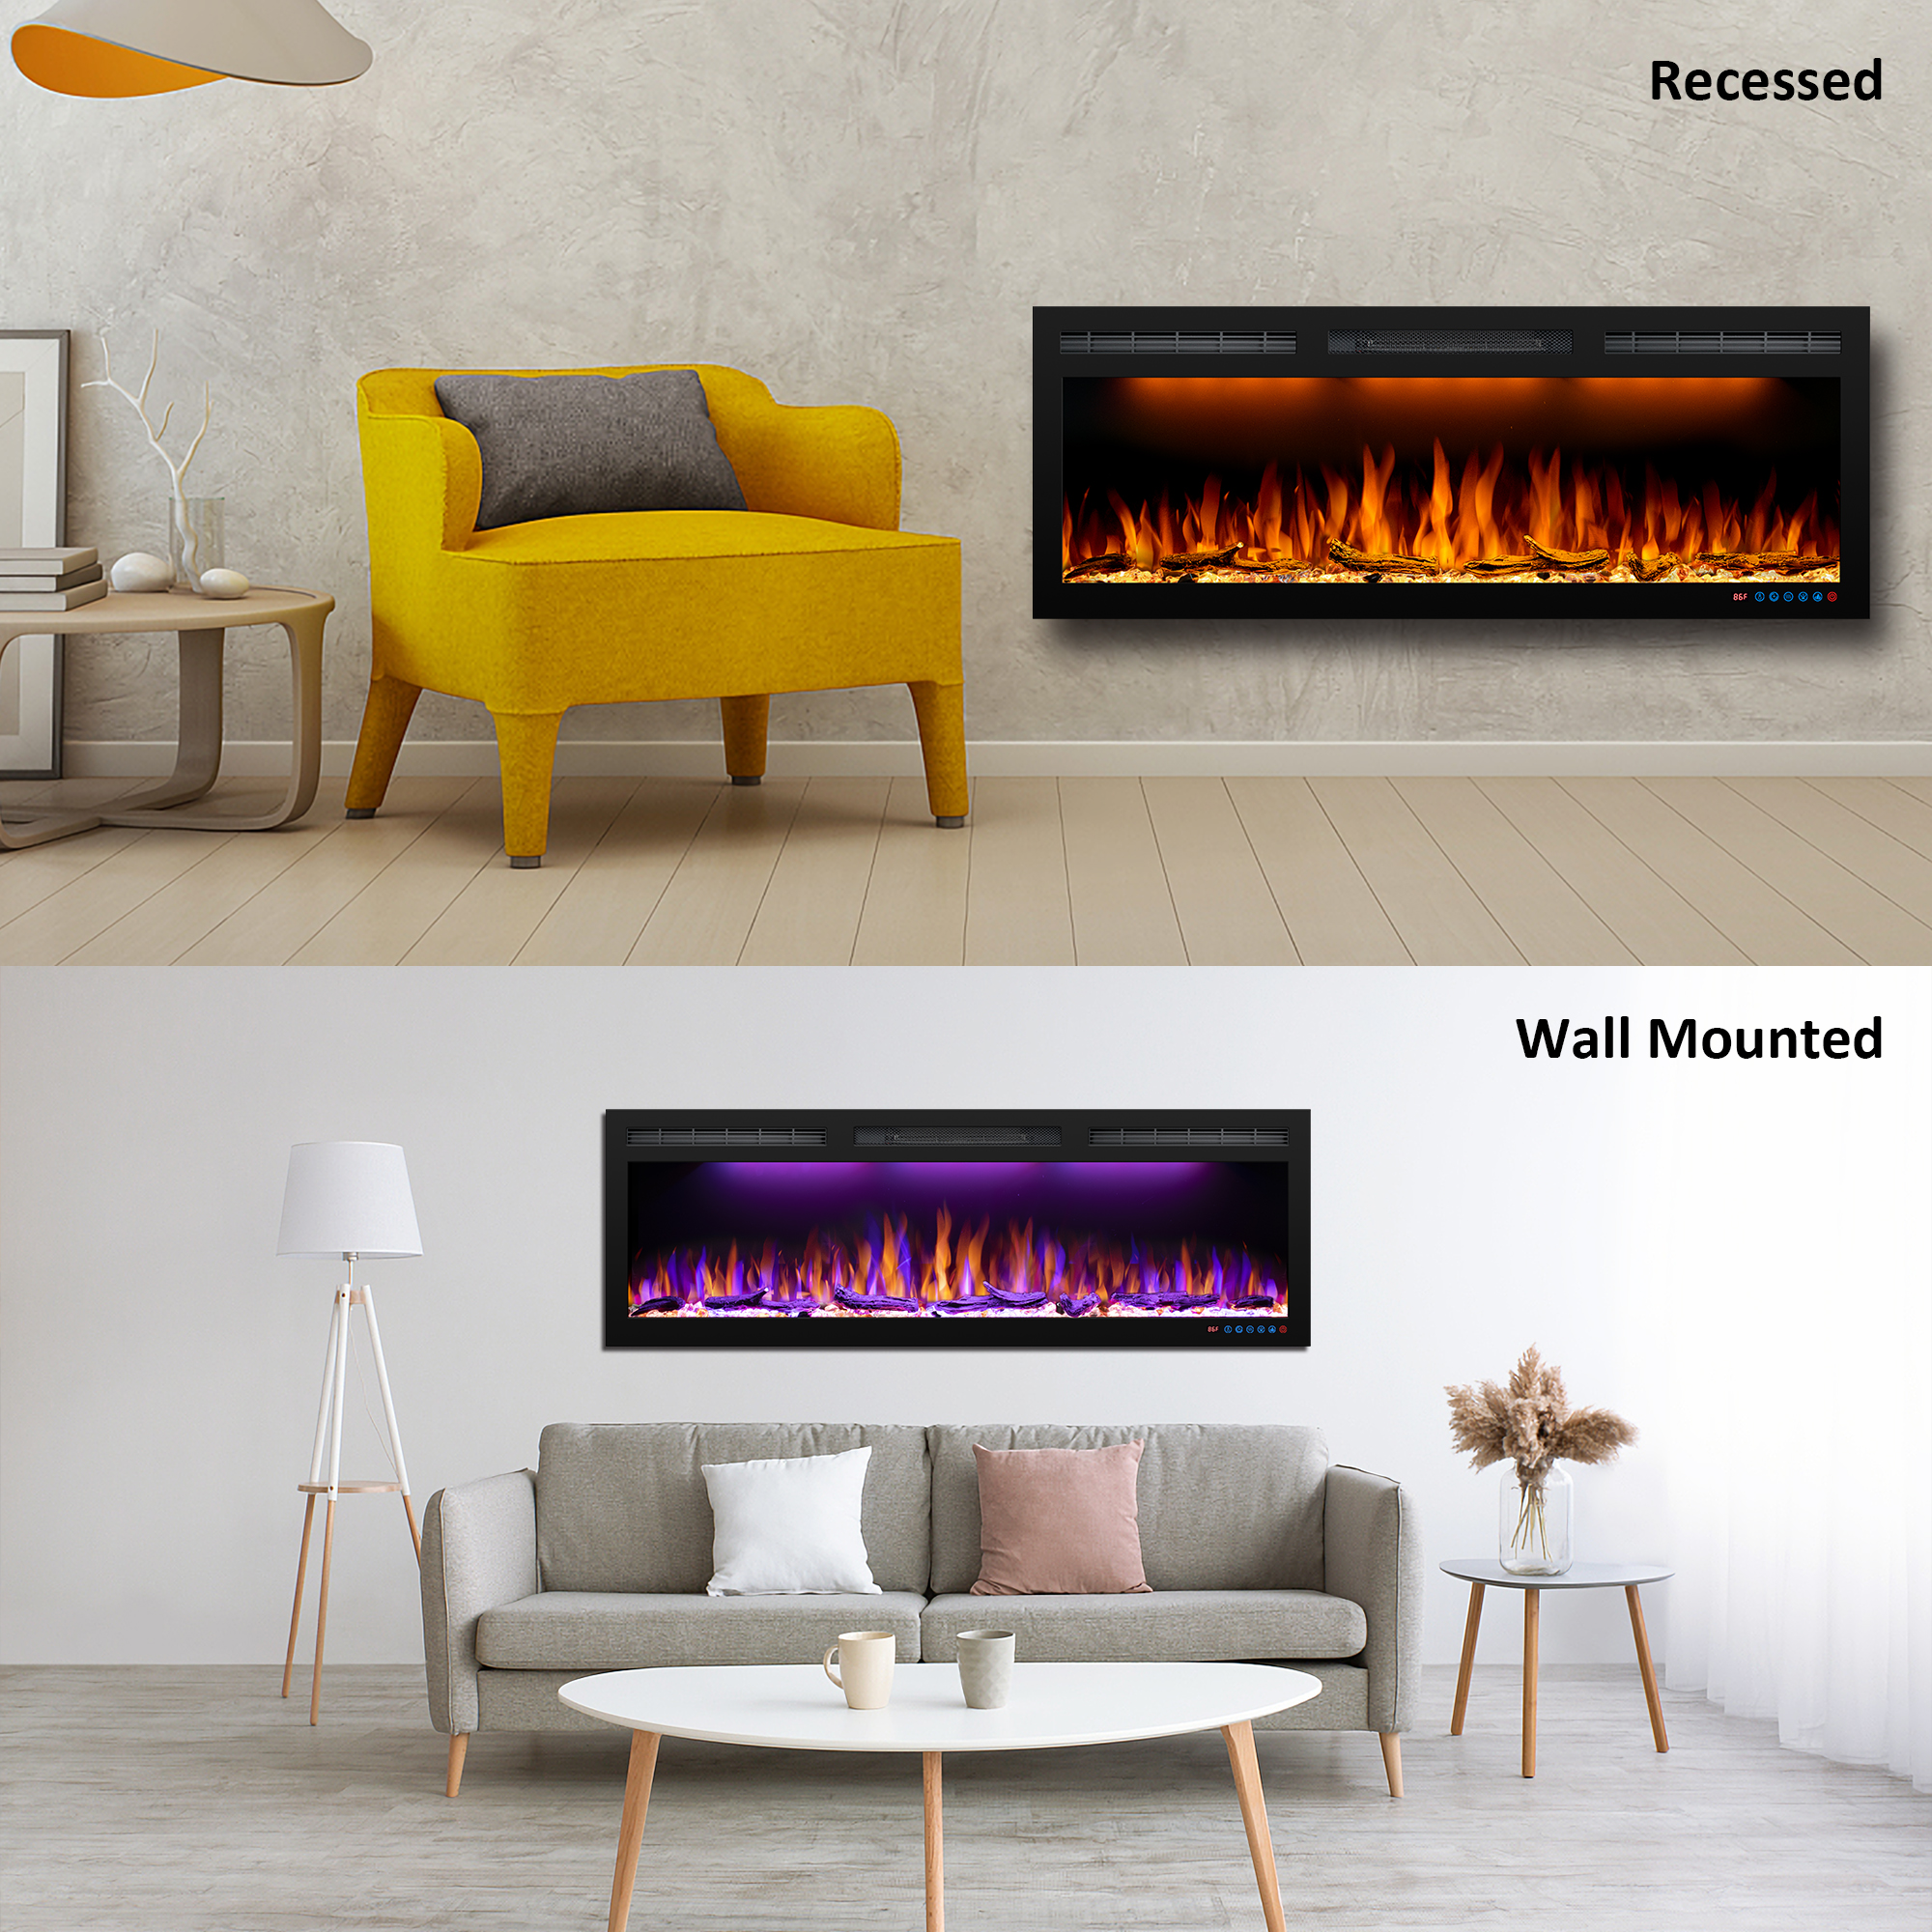 Valuxhome Recessed & Wall Mounted Electric Fireplace with Ultra Slim Frame, Logs And Crystals